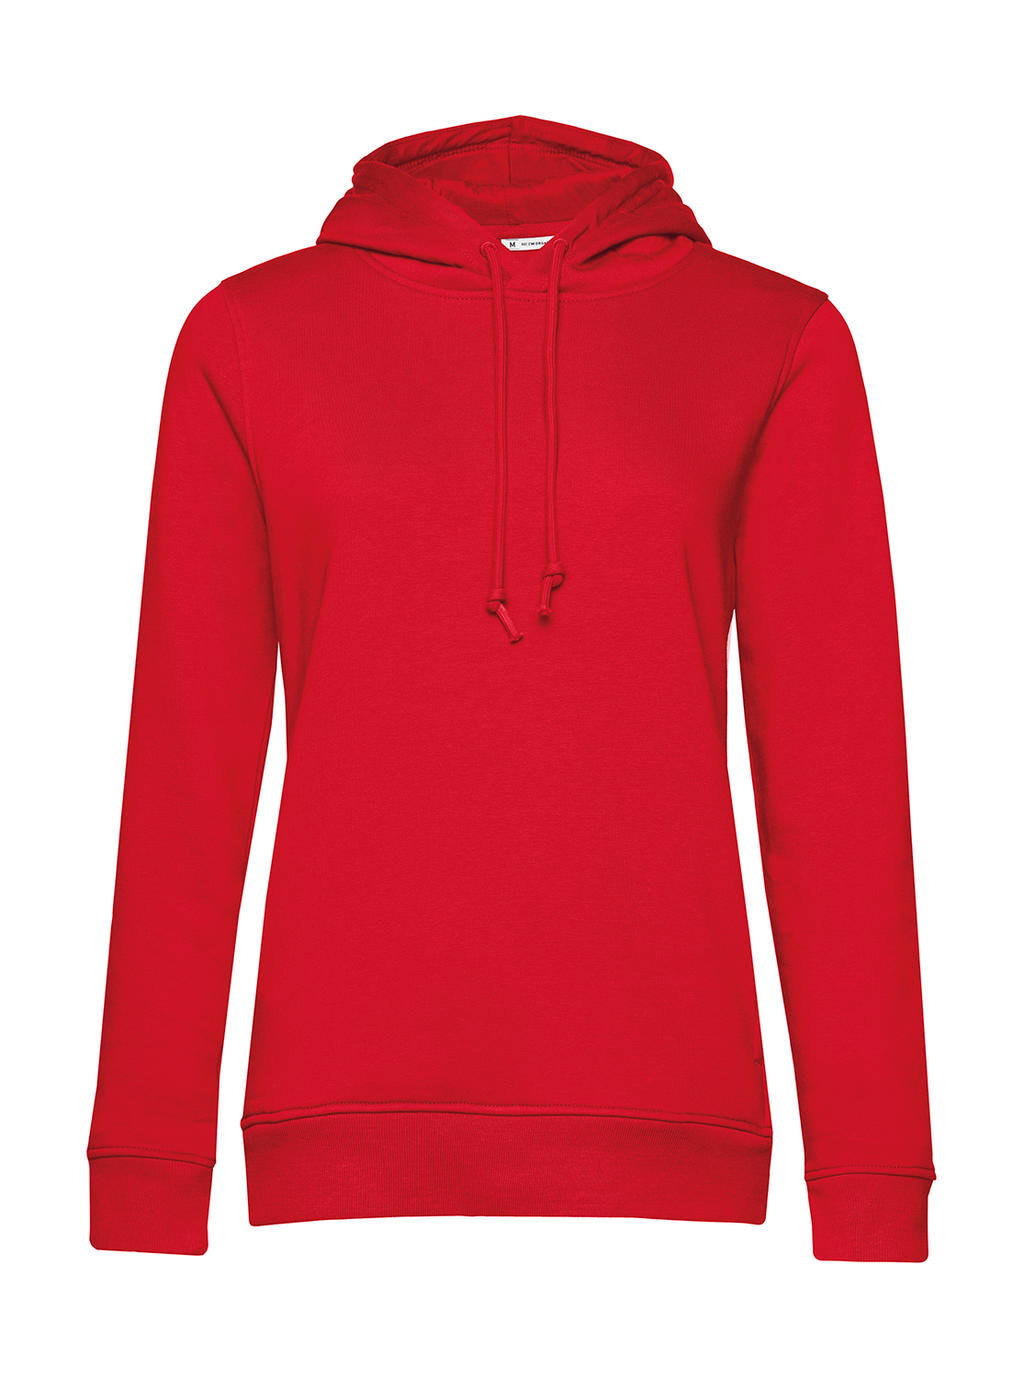  Organic Inspire Hooded /women_? in Farbe Red